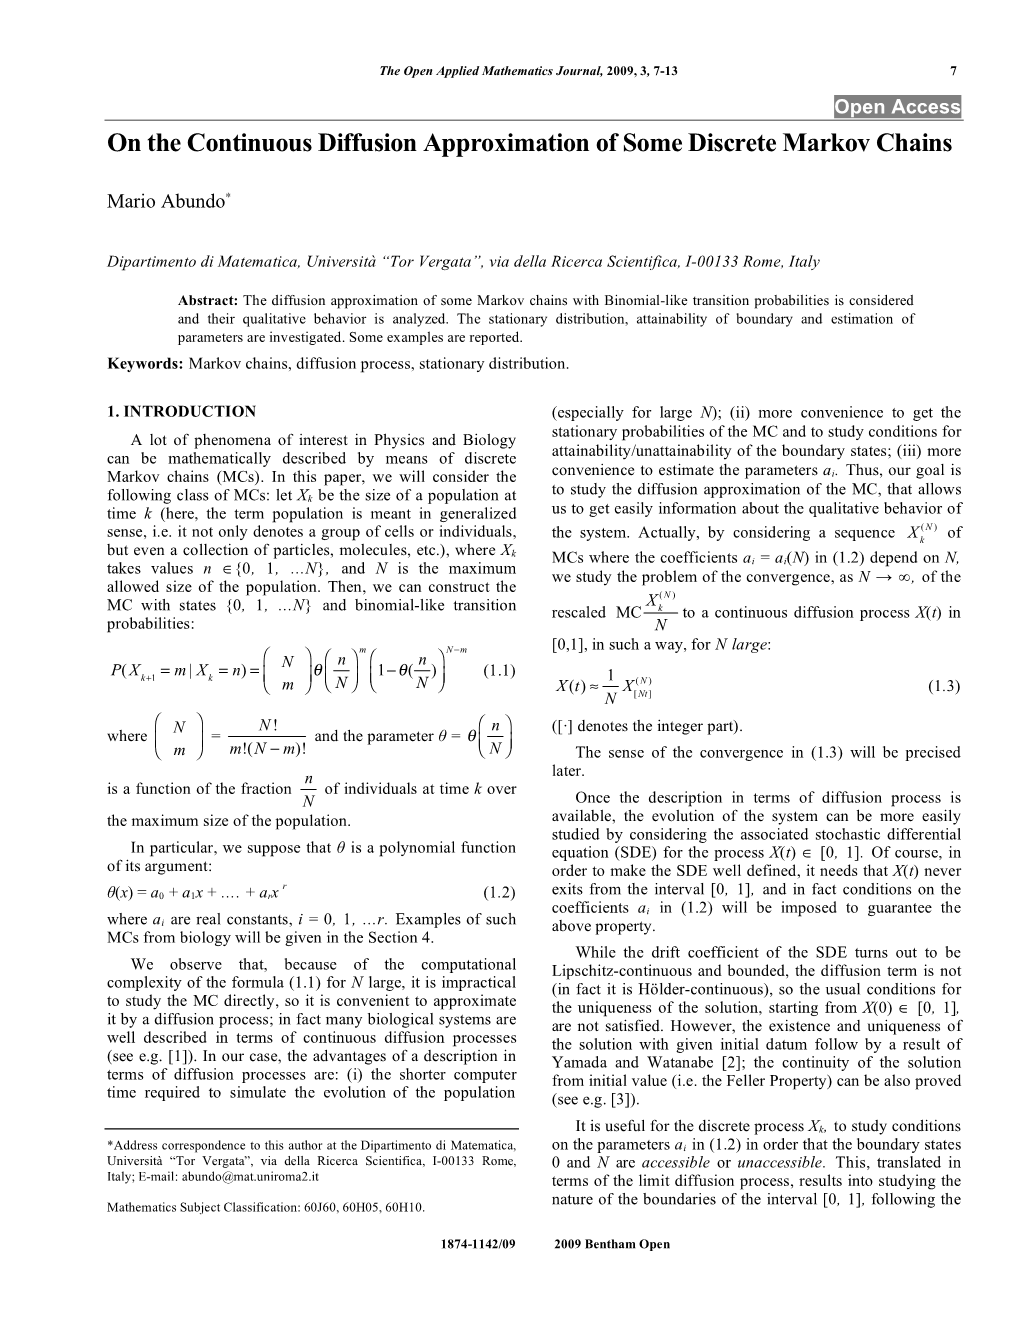 On the Continuous Diffusion Approximation of Some Discrete Markov Chains